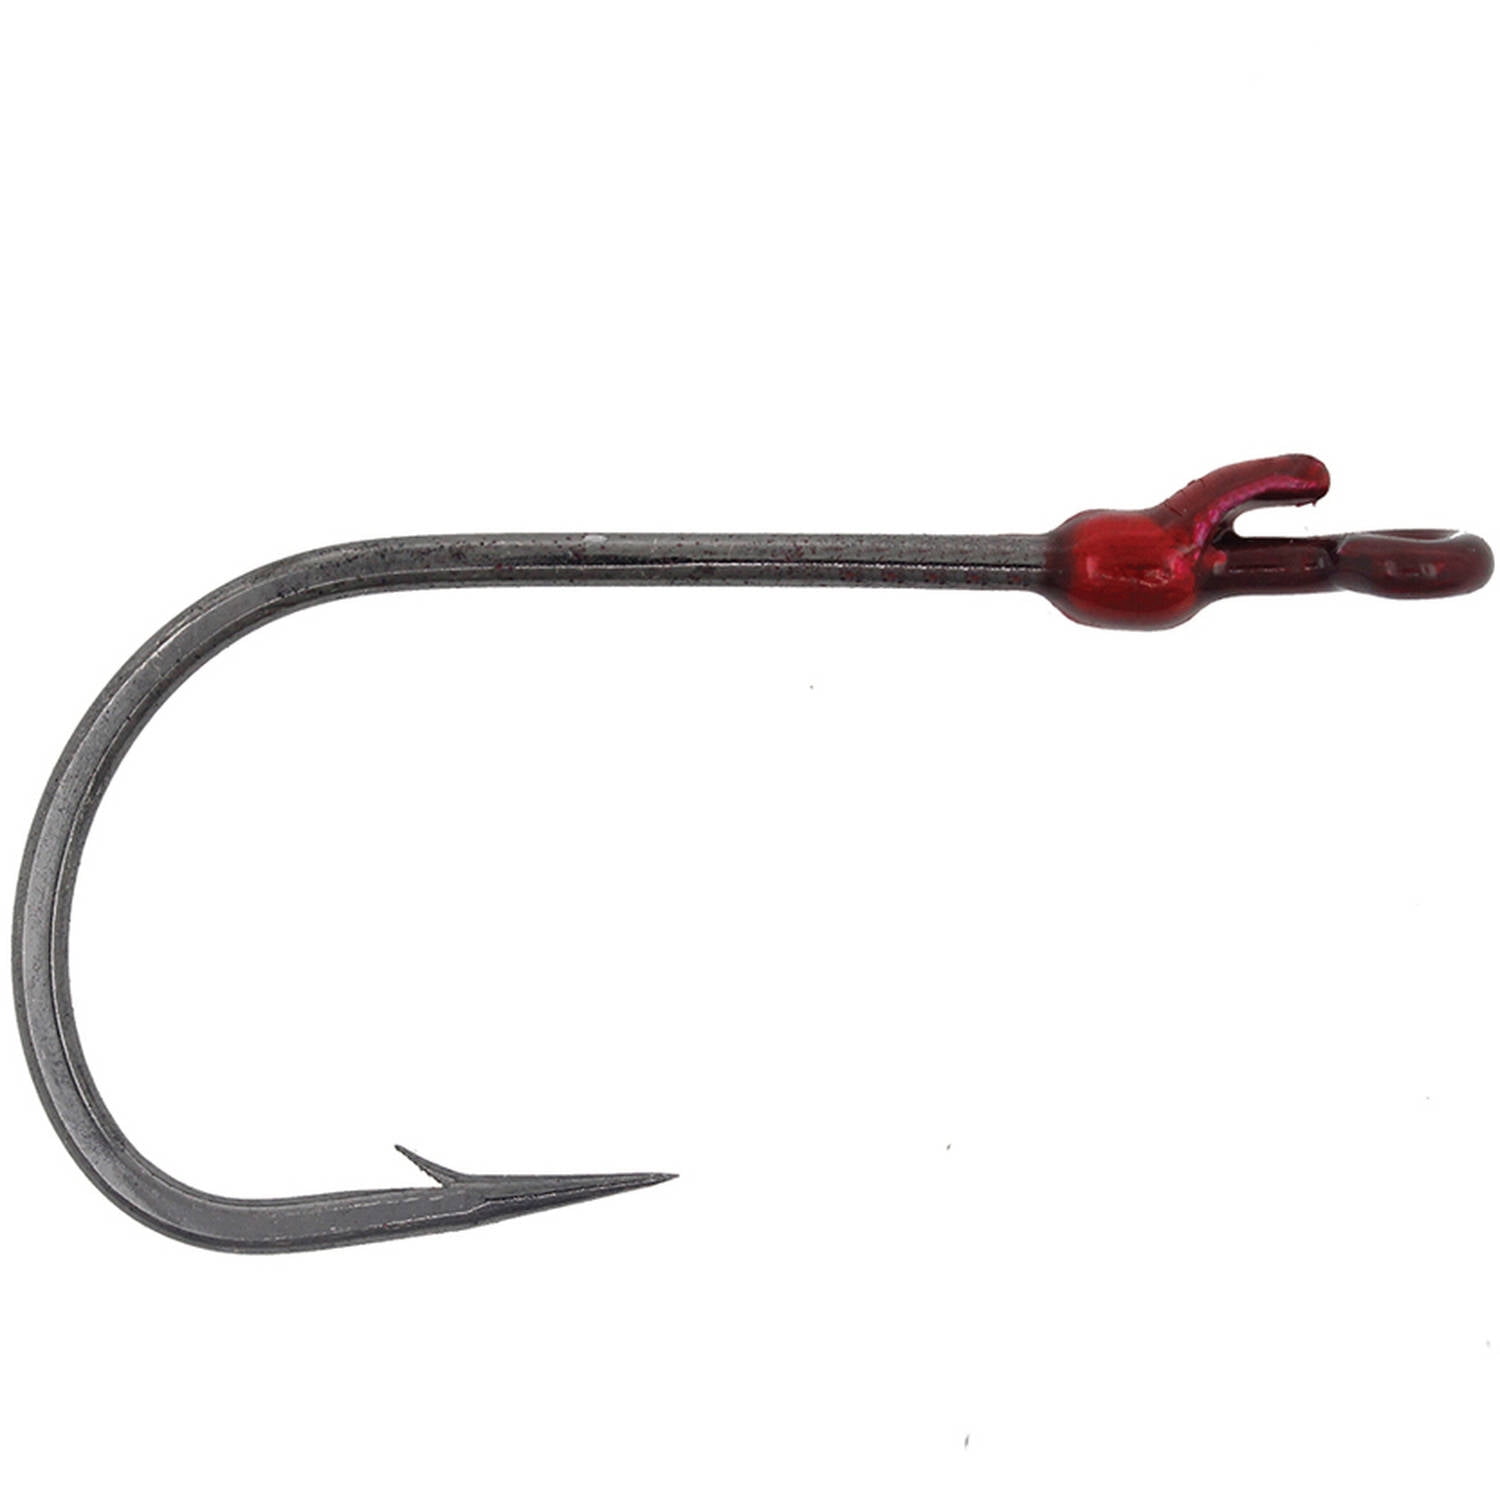 Mustad Grip Pin Max 3X Strong 4/0